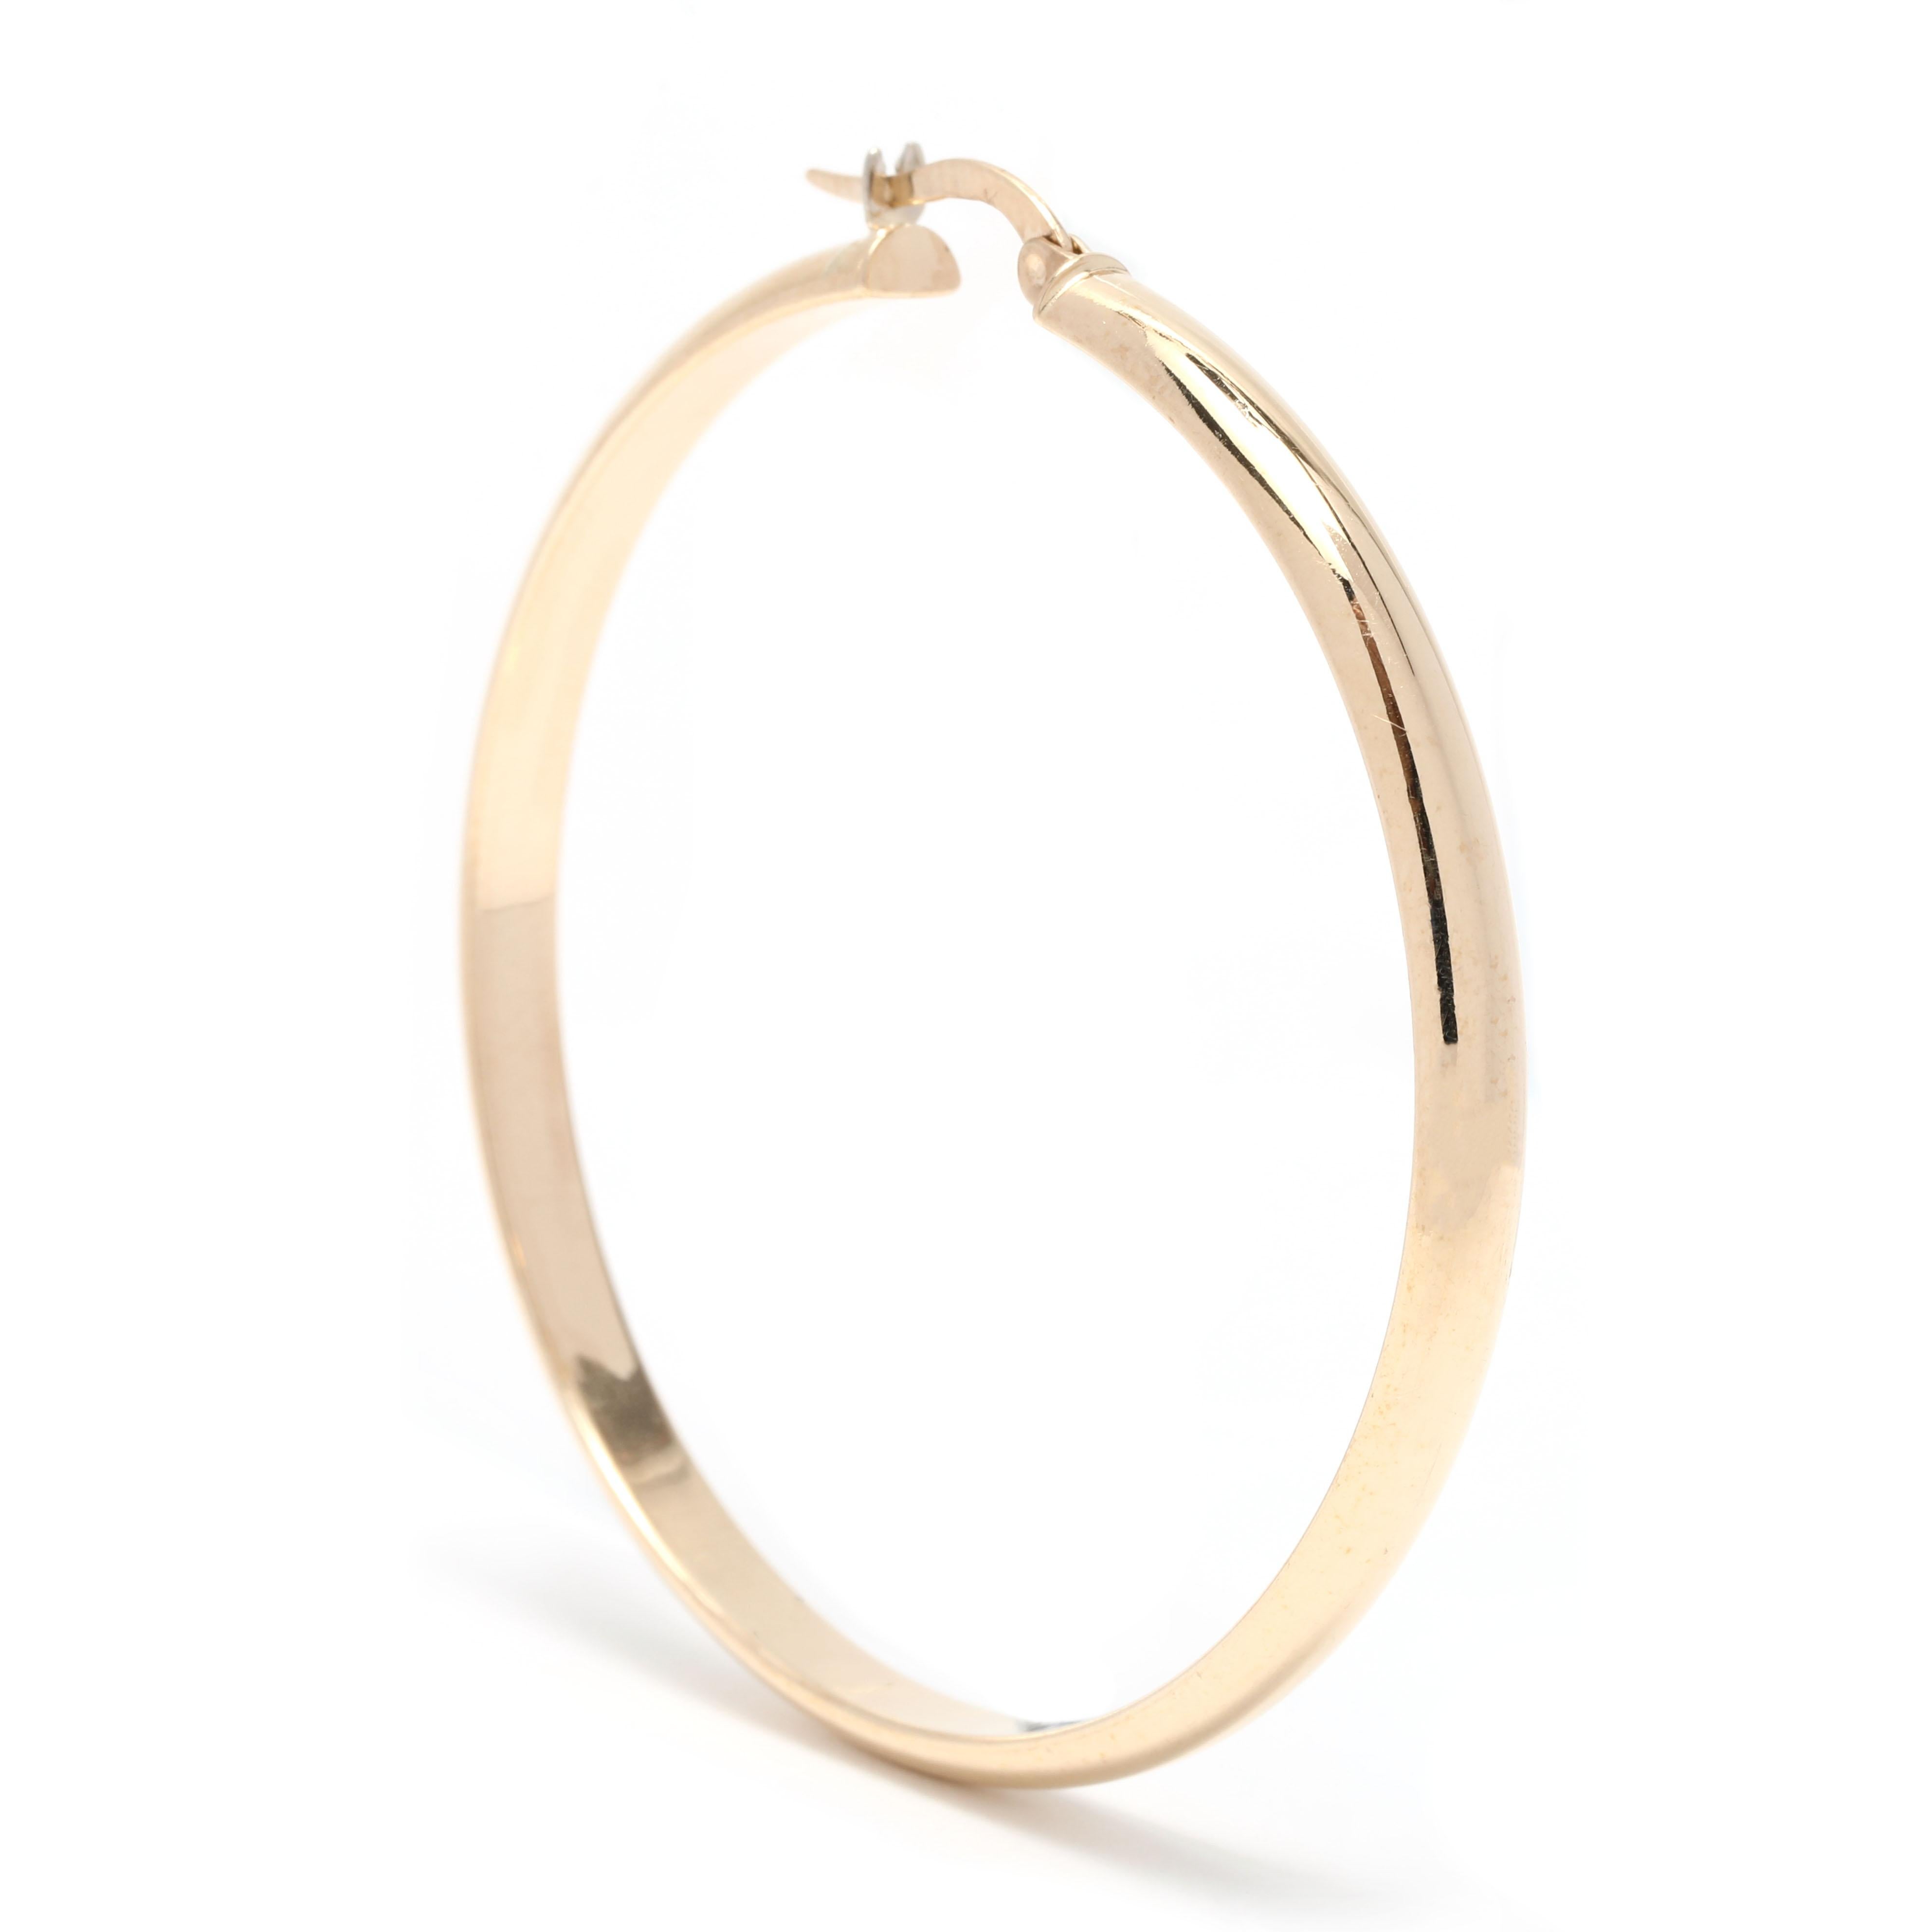 These classic, yet stylish 4mm Large Gold Thin Hoop Earrings are perfect for everyday wear. These earrings are crafted from 14K Yellow Gold and measure 2 inches in length, making them the perfect size for everyday wear. With their large skinny gold